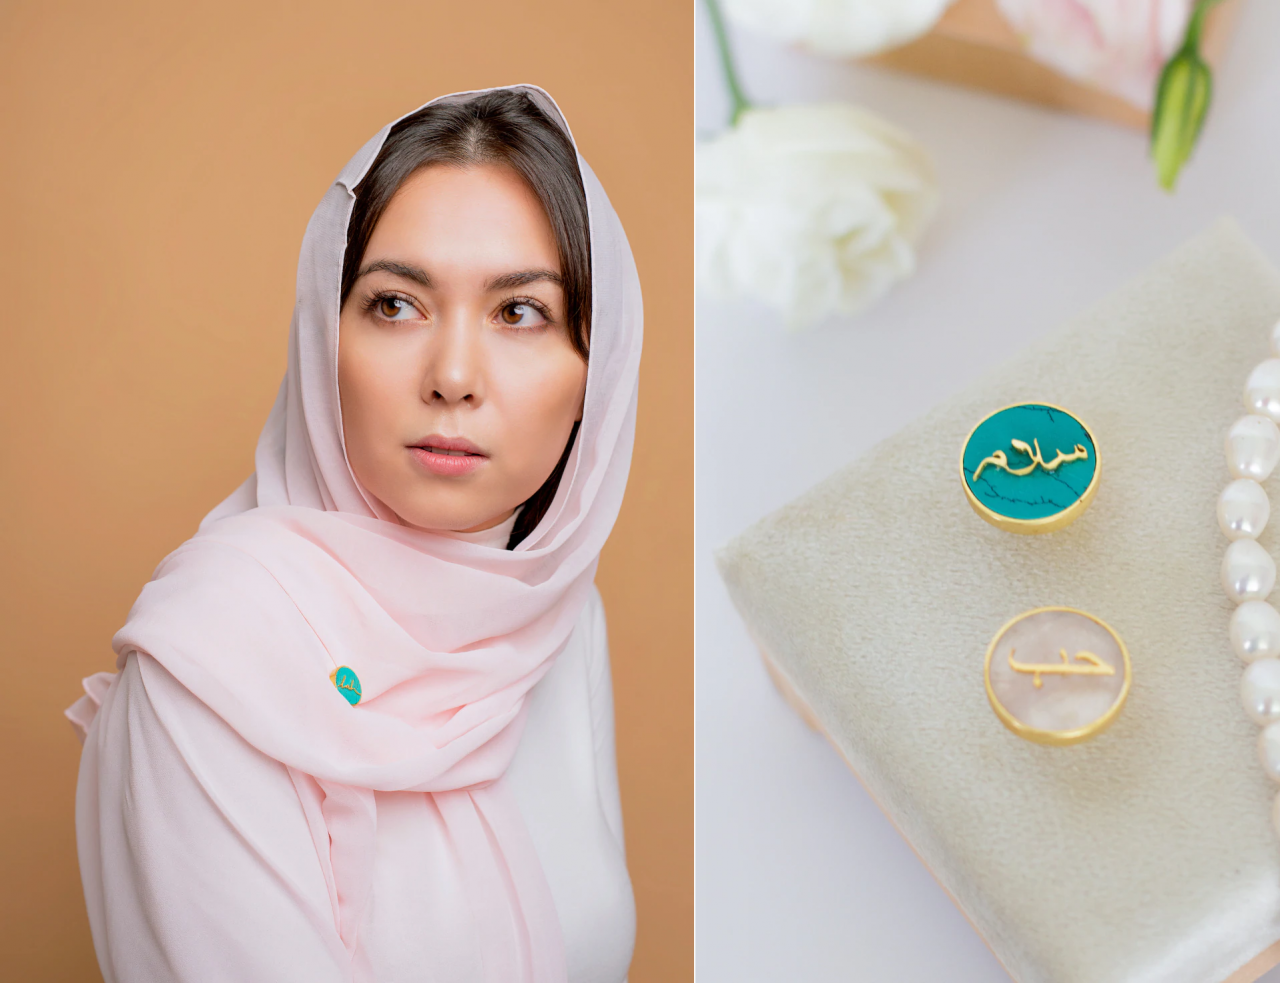 Fugeelah’s Brooches from the Peace & Power collection, a special collaboration with Malaysian actress Siti Saleha. – Diaguild.com pic